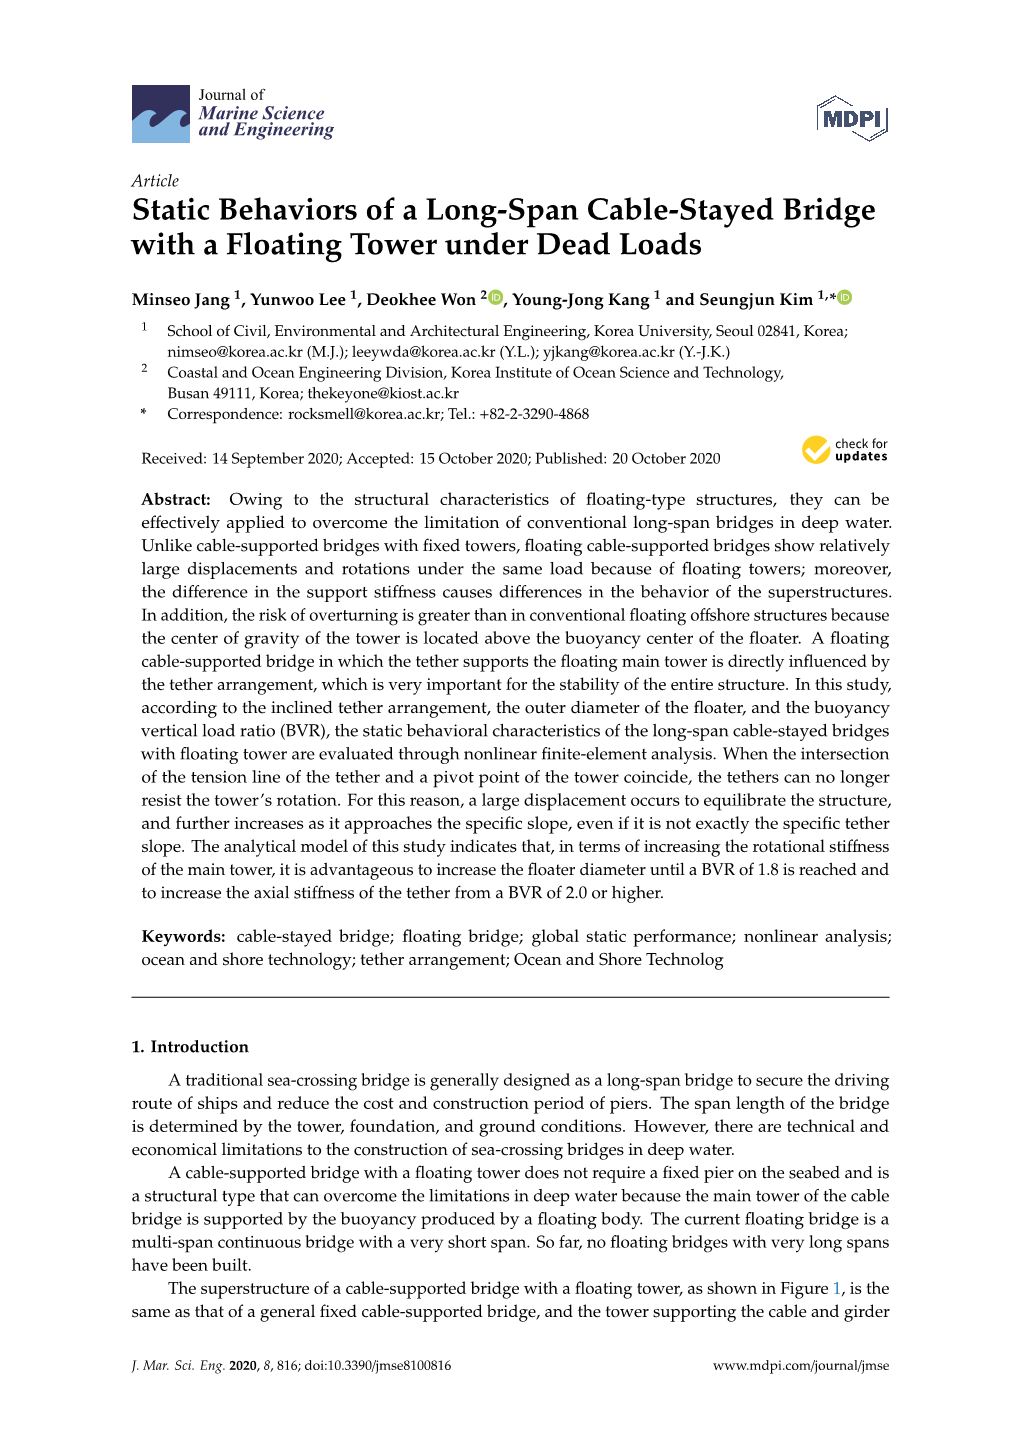 Static Behaviors of a Long-Span Cable-Stayed Bridge with a Floating Tower Under Dead Loads